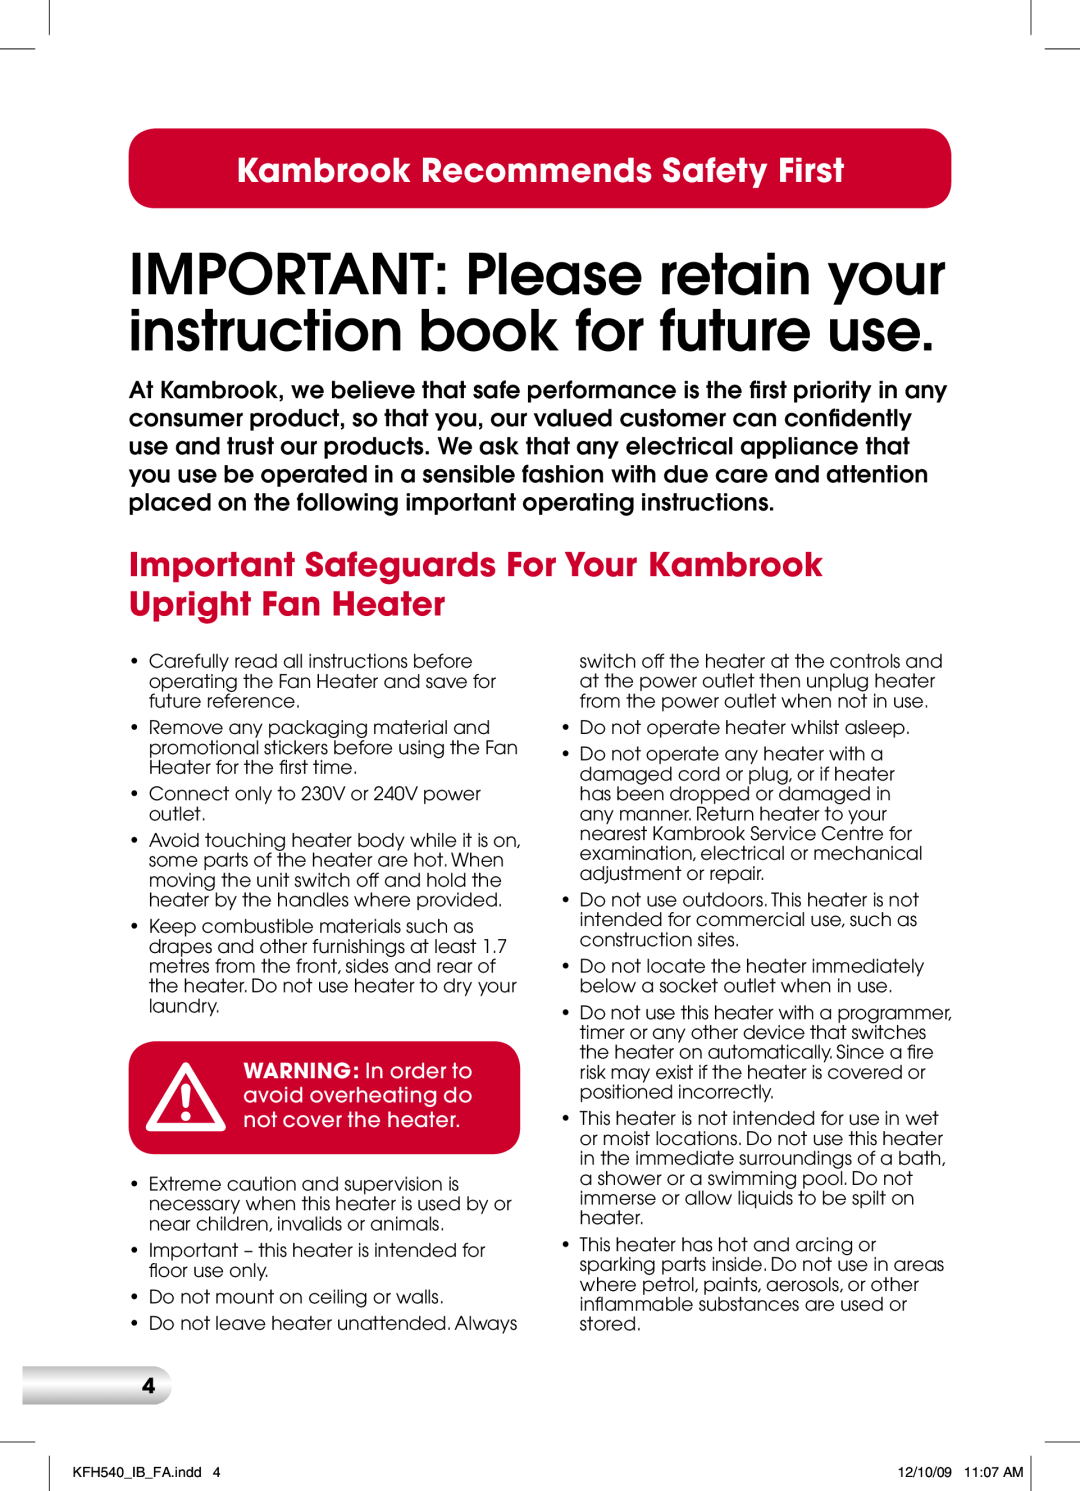 Kambrook KFH540 manual Important Safeguards For Your Kambrook Upright Fan Heater, Kambrook Recommends Safety First 